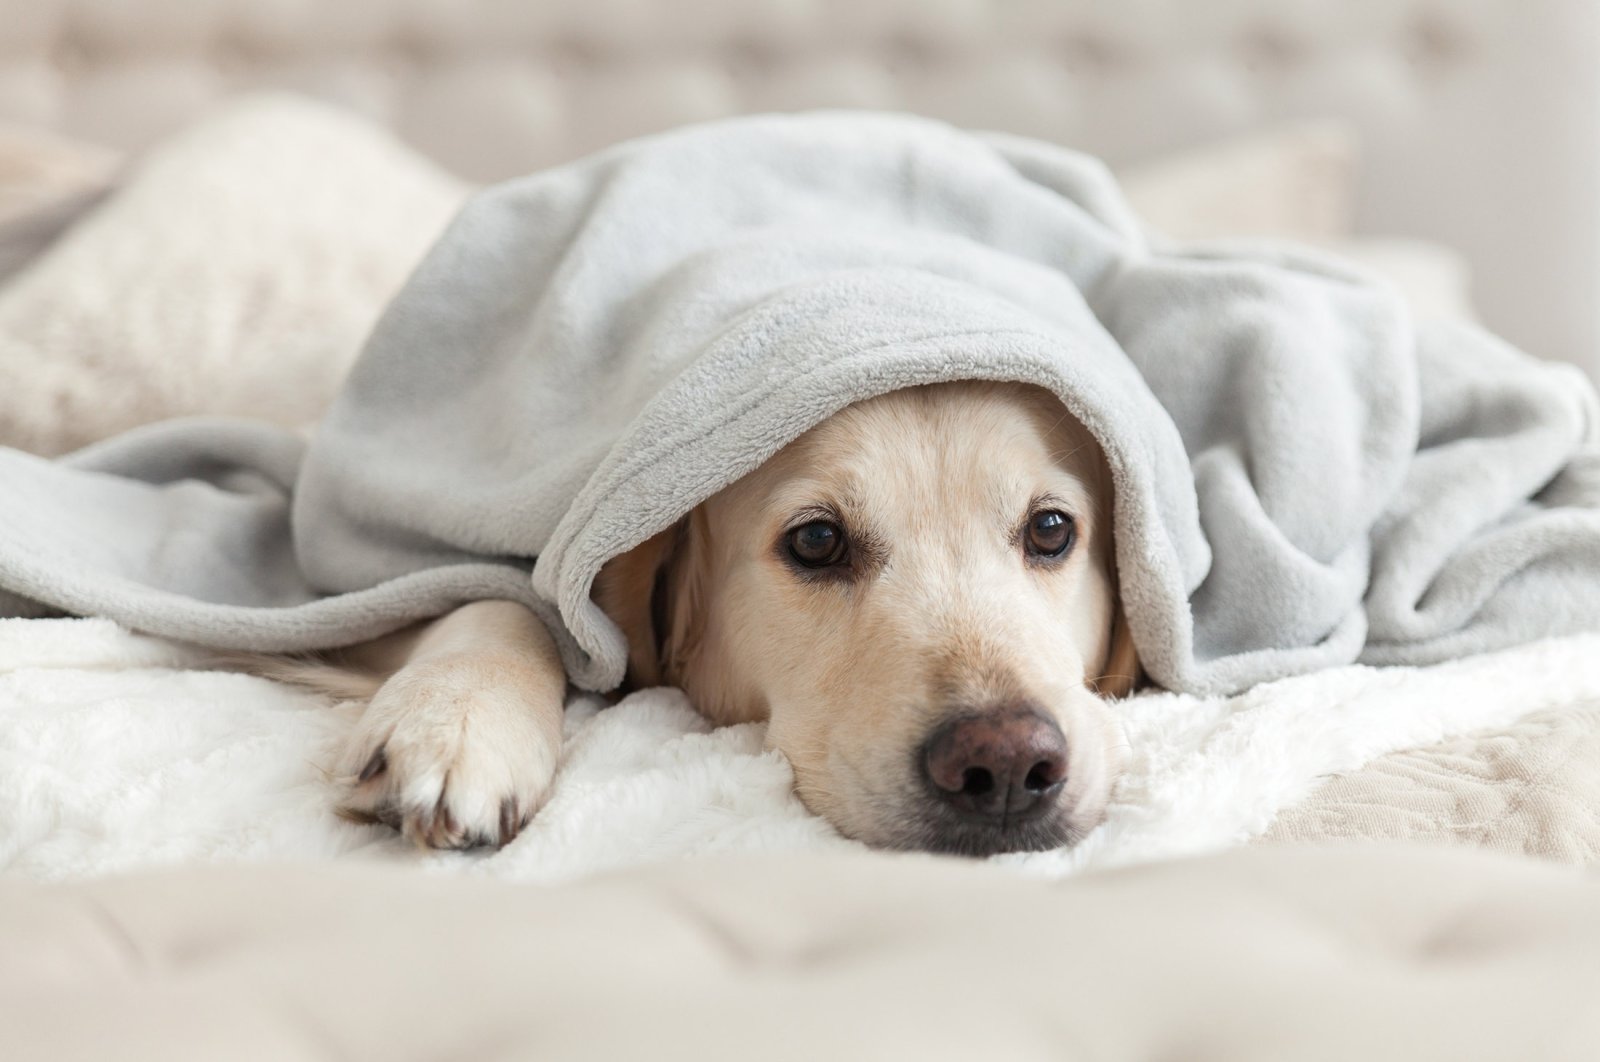 A bored young golden retriever dog takes cover under a light gray plaid. (Shutterstock Photo)